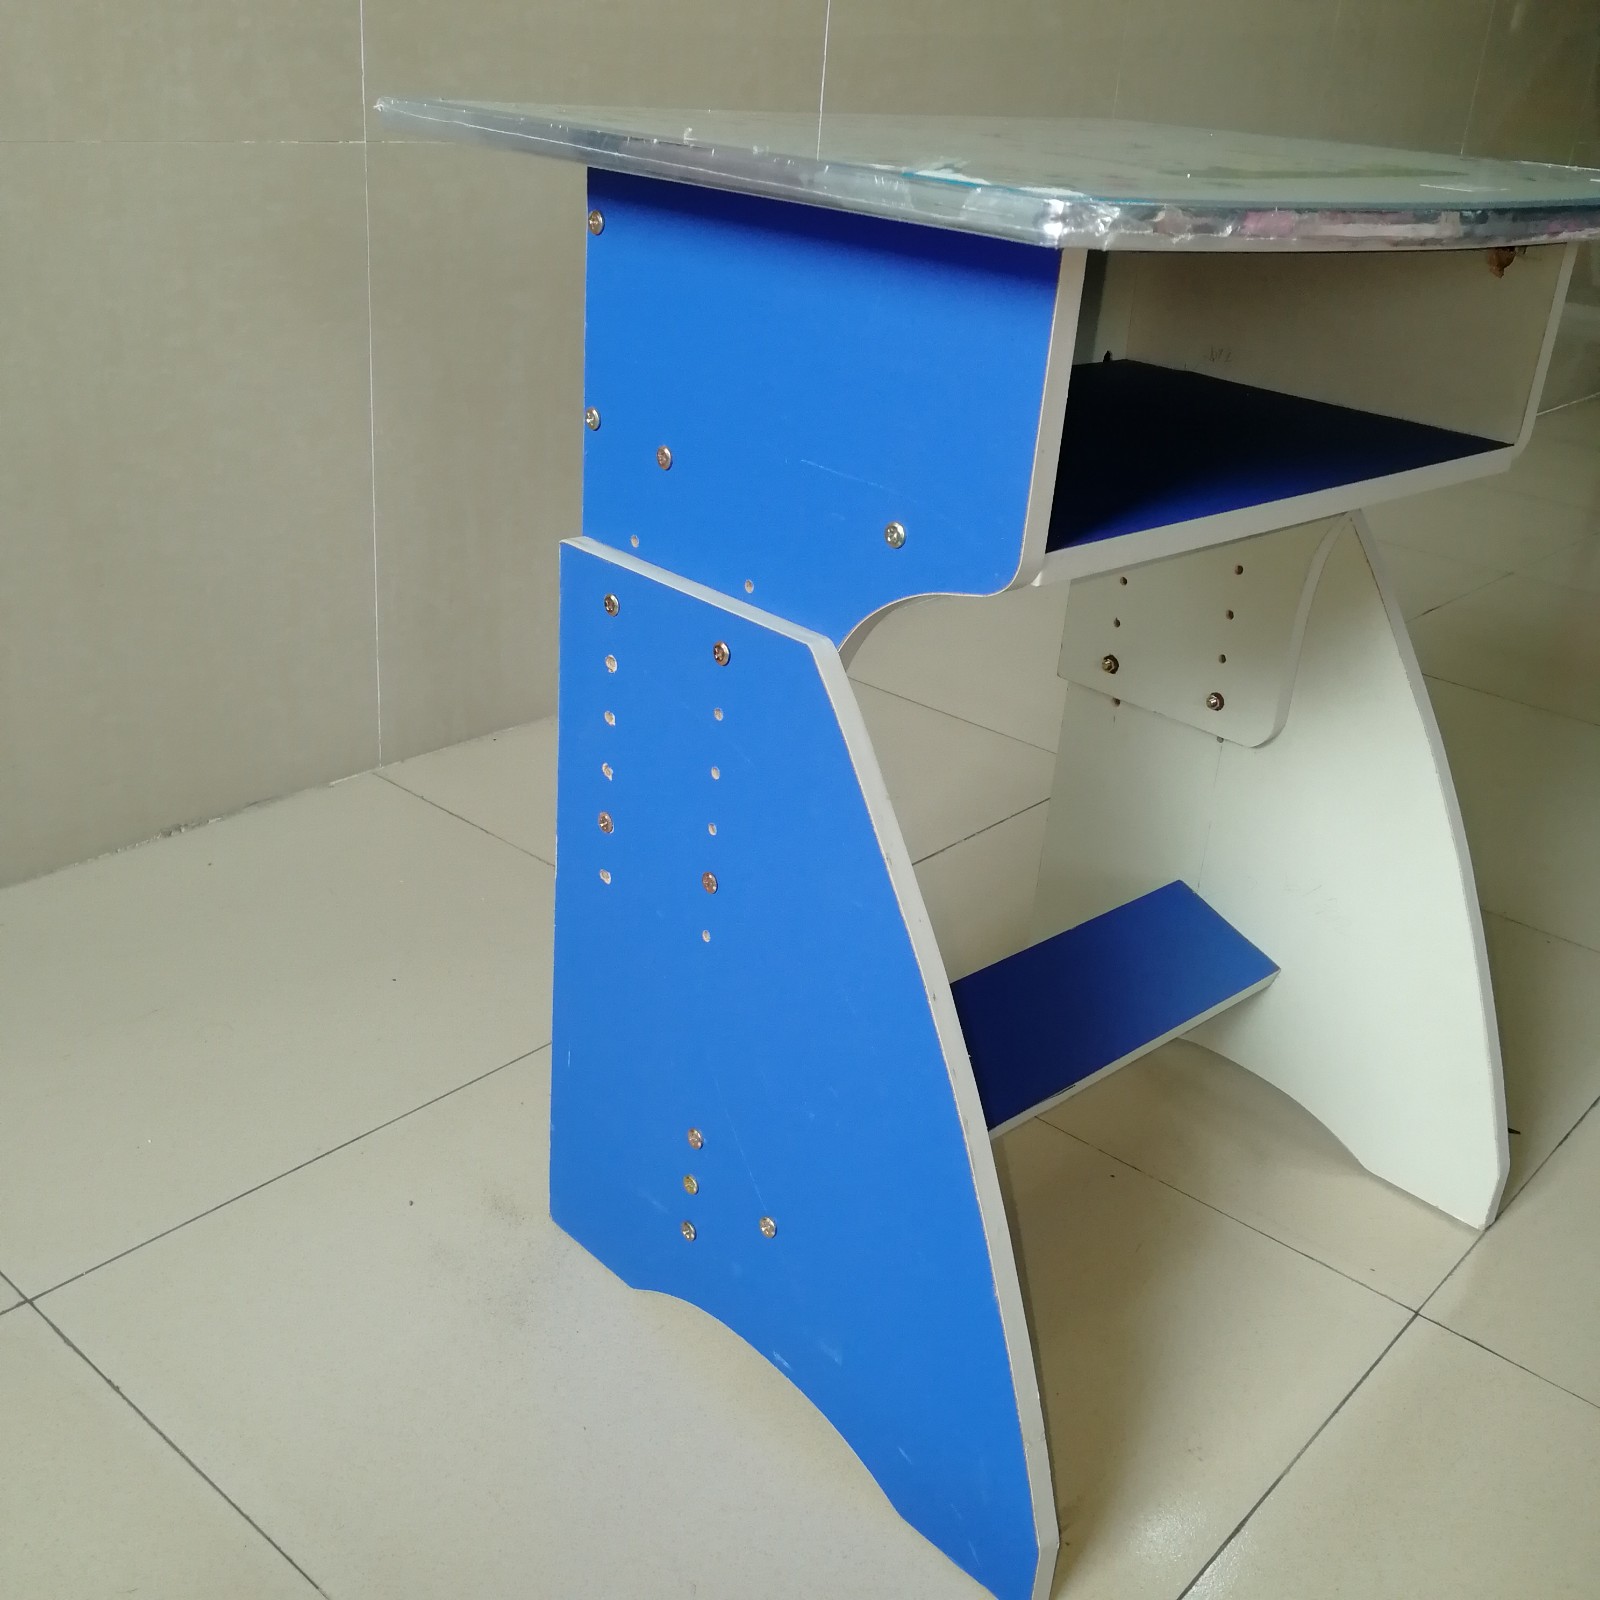 Aoqi excellent study table with chair for child with good price for home